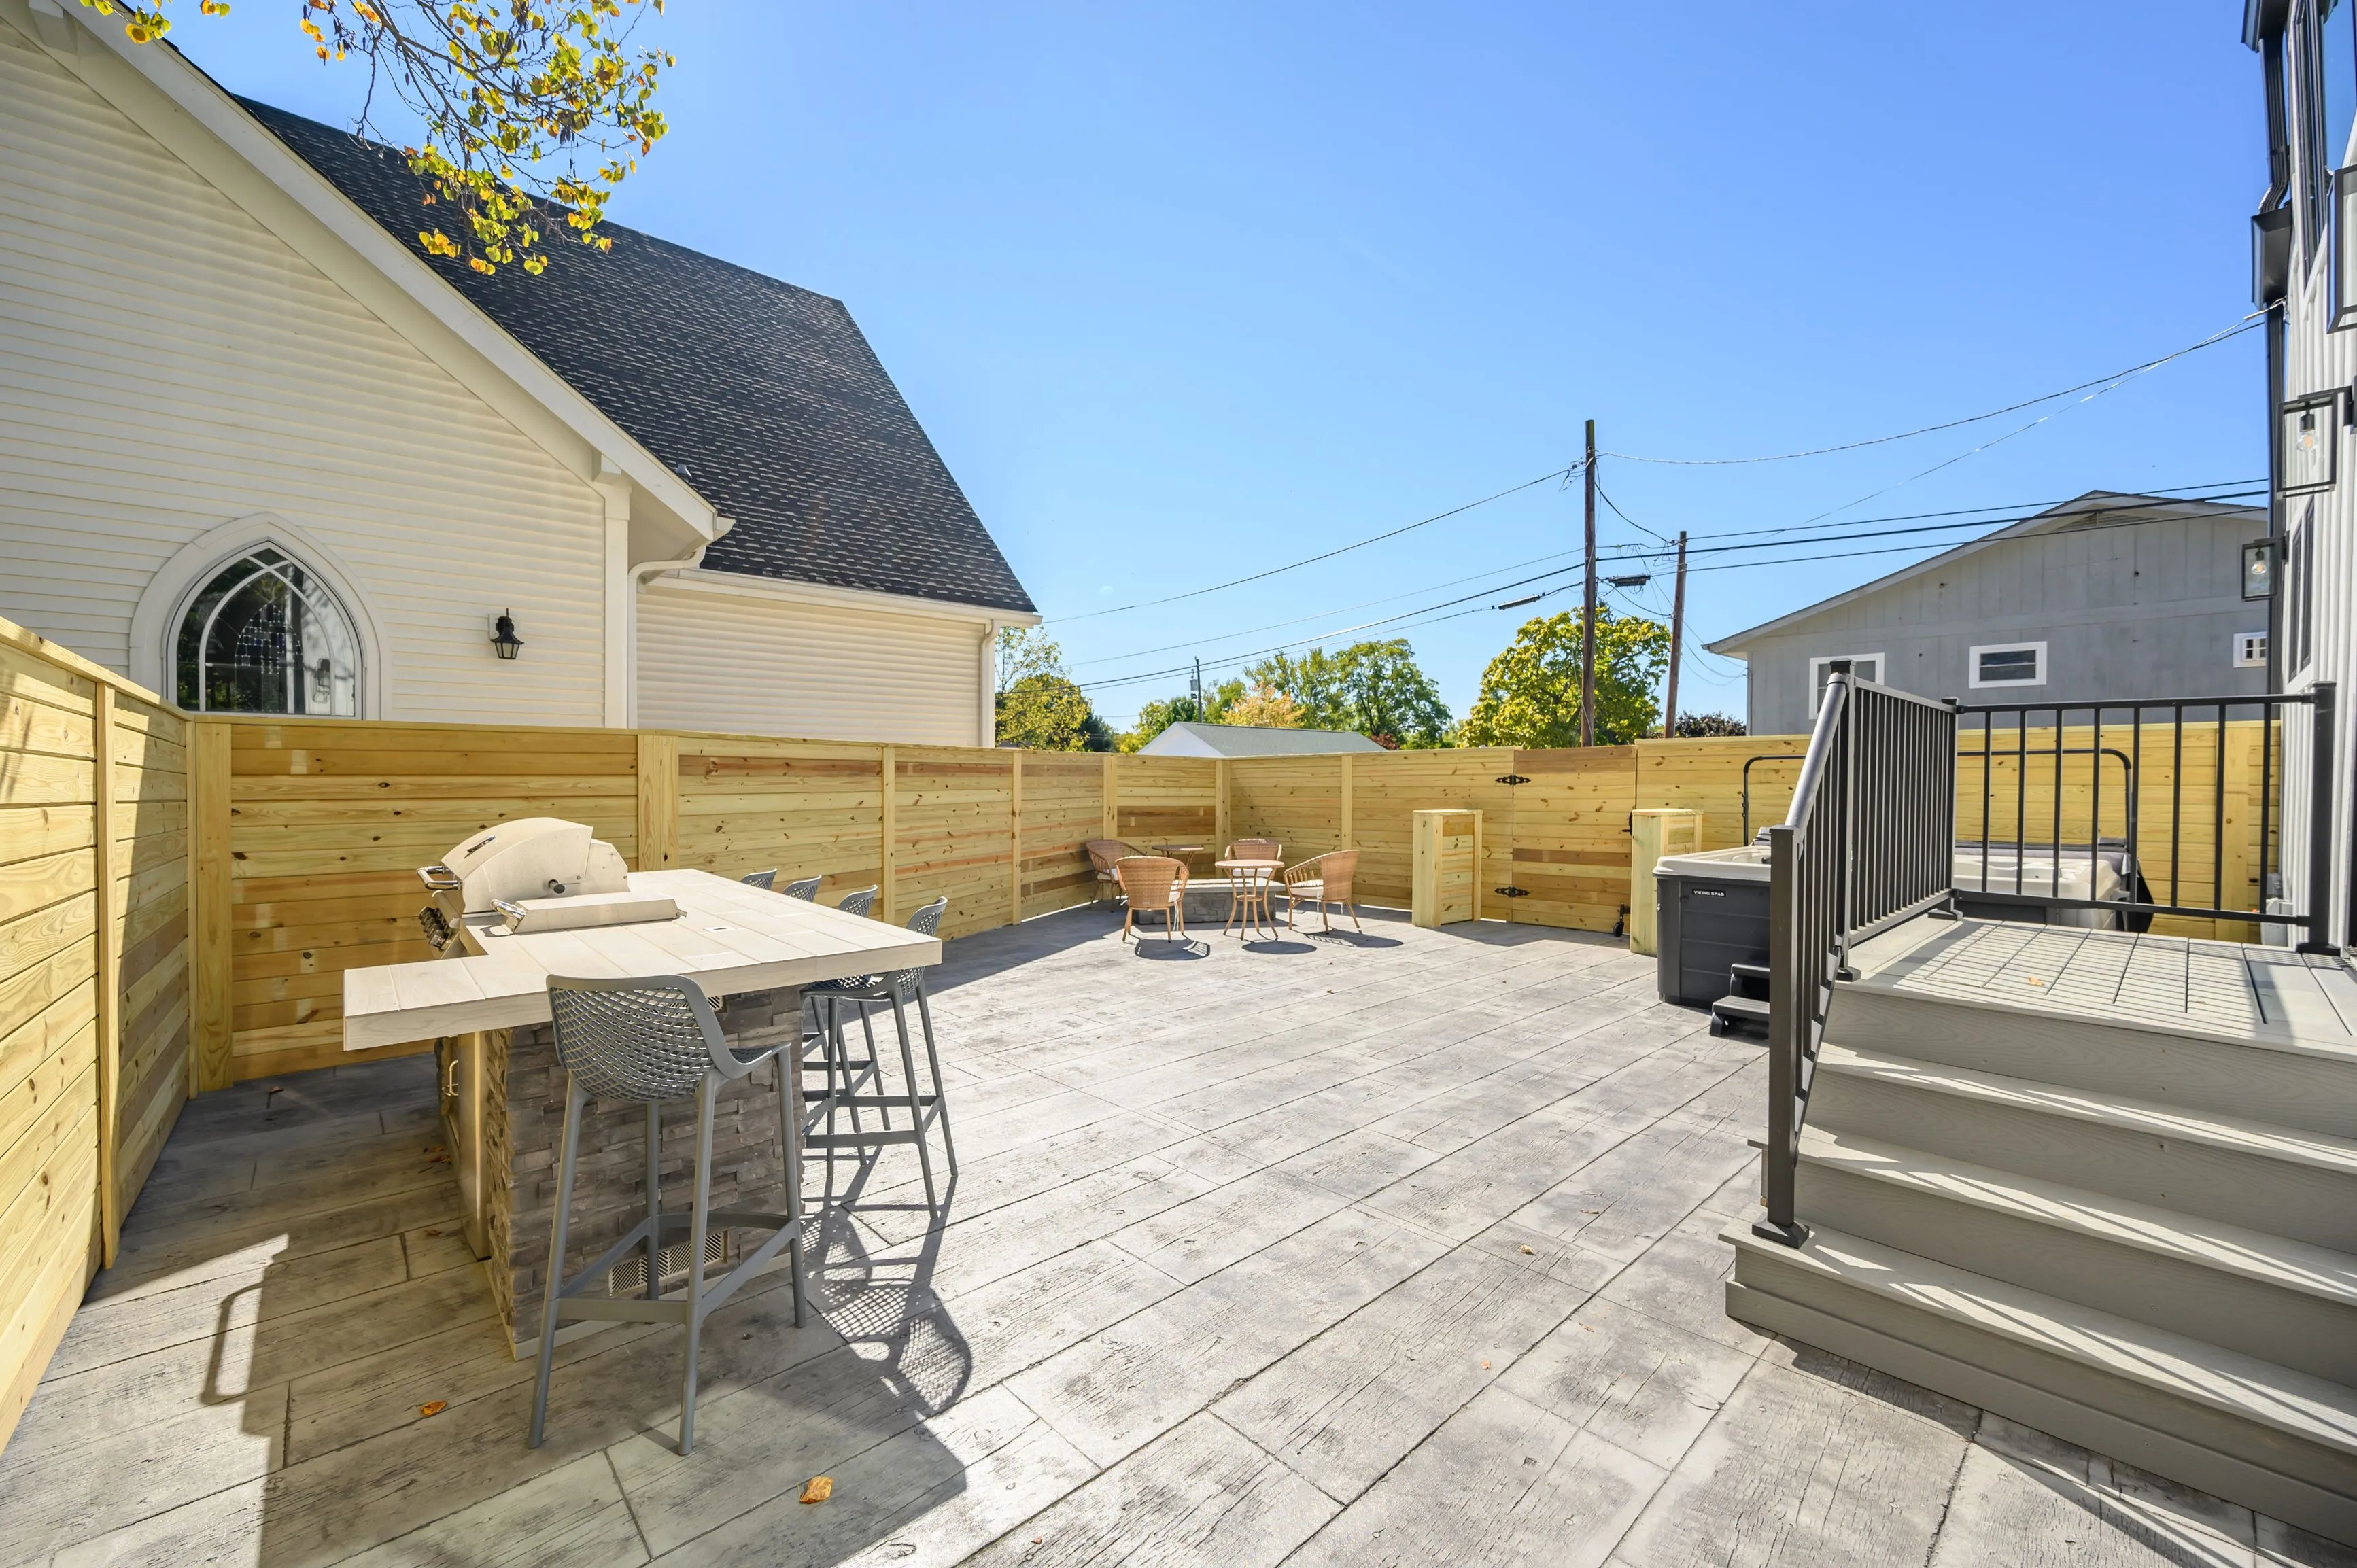 Spacious backyard patio area with wooden privacy fence, outdoor furniture, and a barbecue grill beside a residential building on a sunny day.